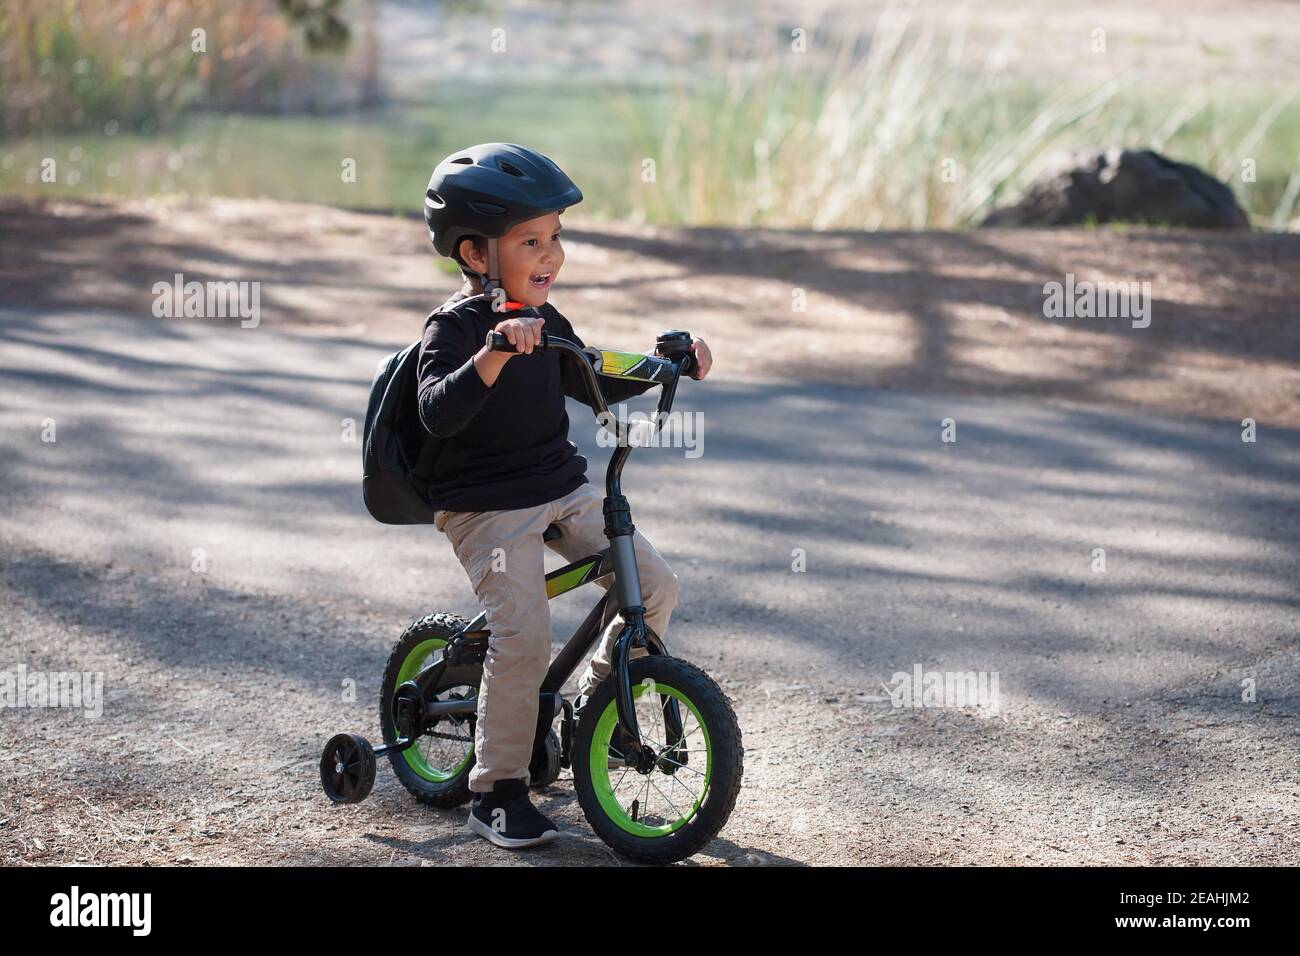 A five year old boy learning to ride a bicycle with training wheels, and a lake in the background. Stock Photo